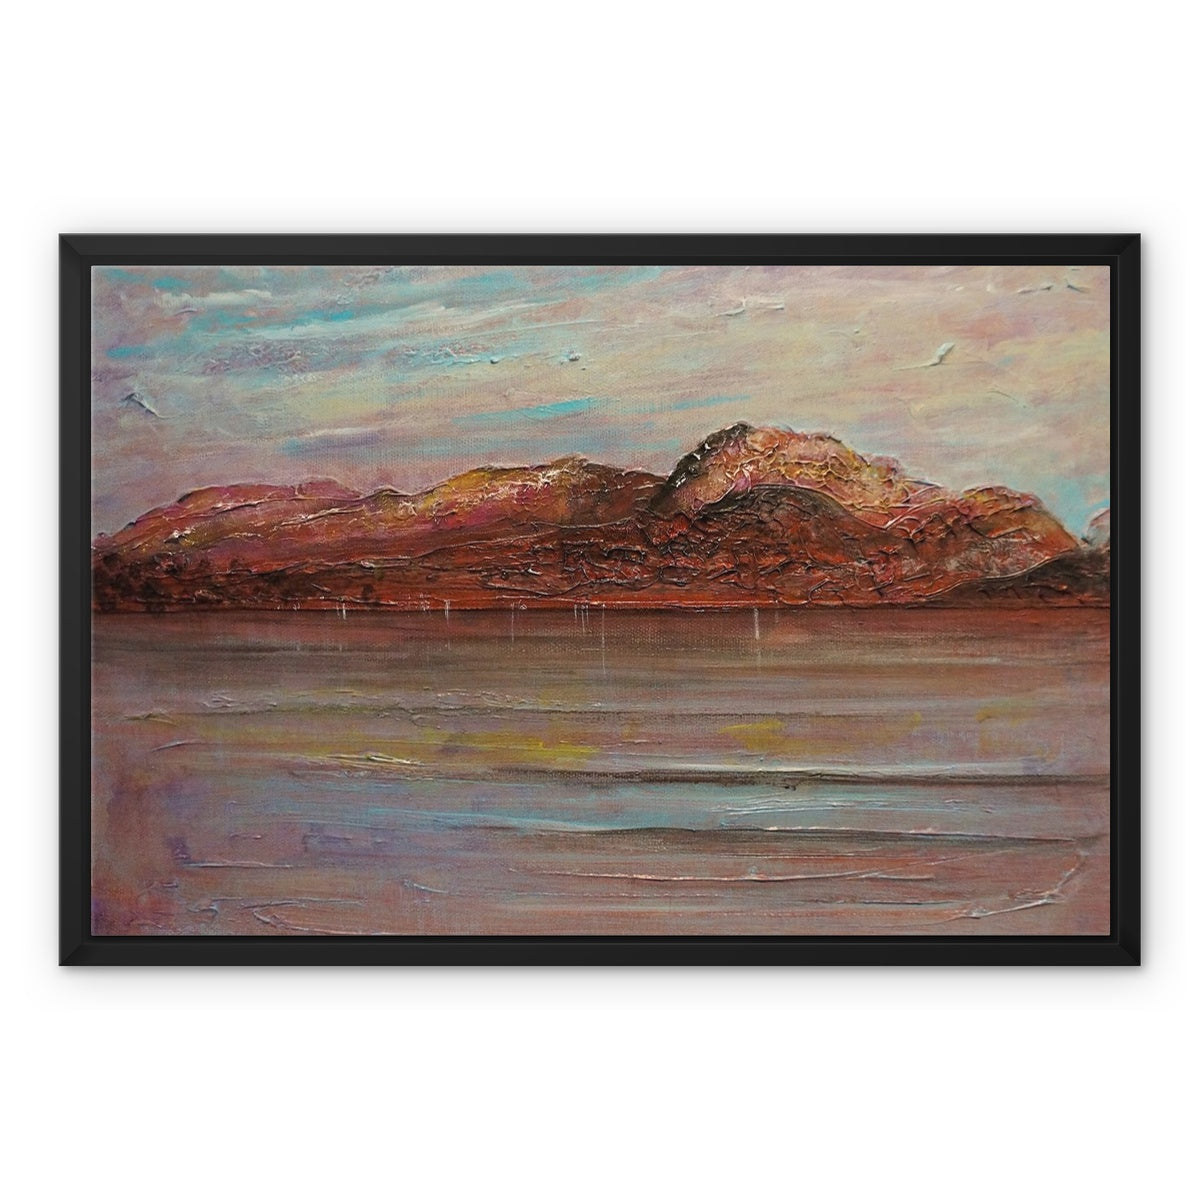 Ben Nevis Painting | Framed Canvas From Scotland-Floating Framed Canvas Prints-Scottish Lochs & Mountains Art Gallery-24"x18"-Black Frame-Paintings, Prints, Homeware, Art Gifts From Scotland By Scottish Artist Kevin Hunter